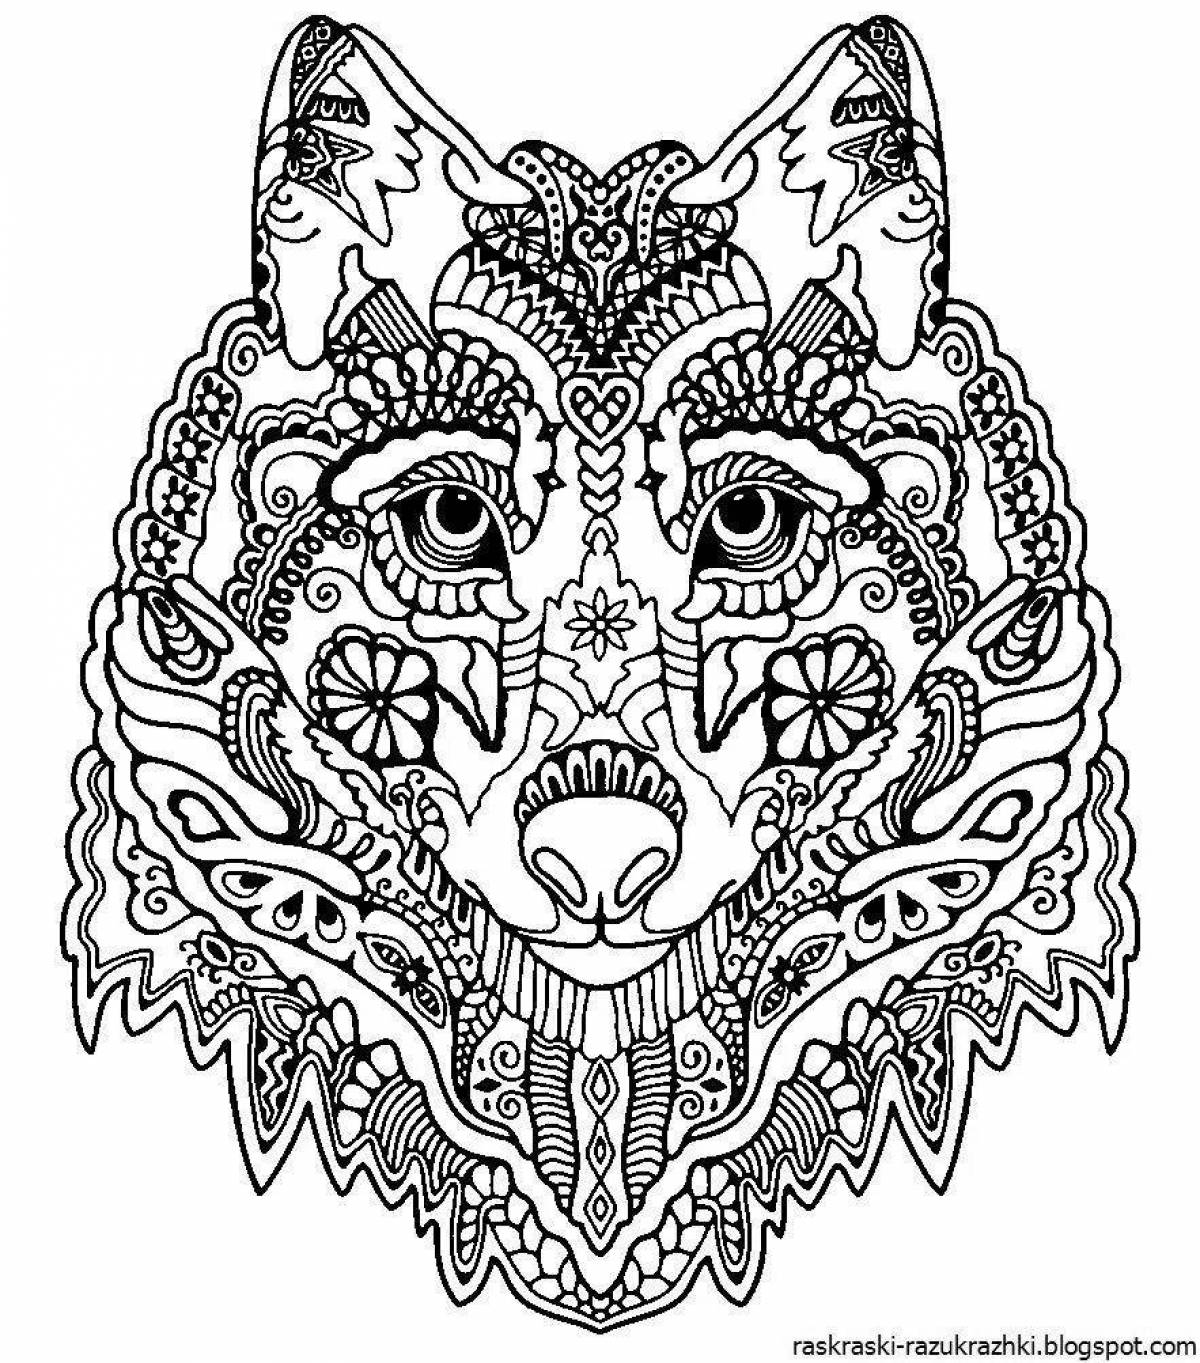 Fabulous animal coloring pages for adults